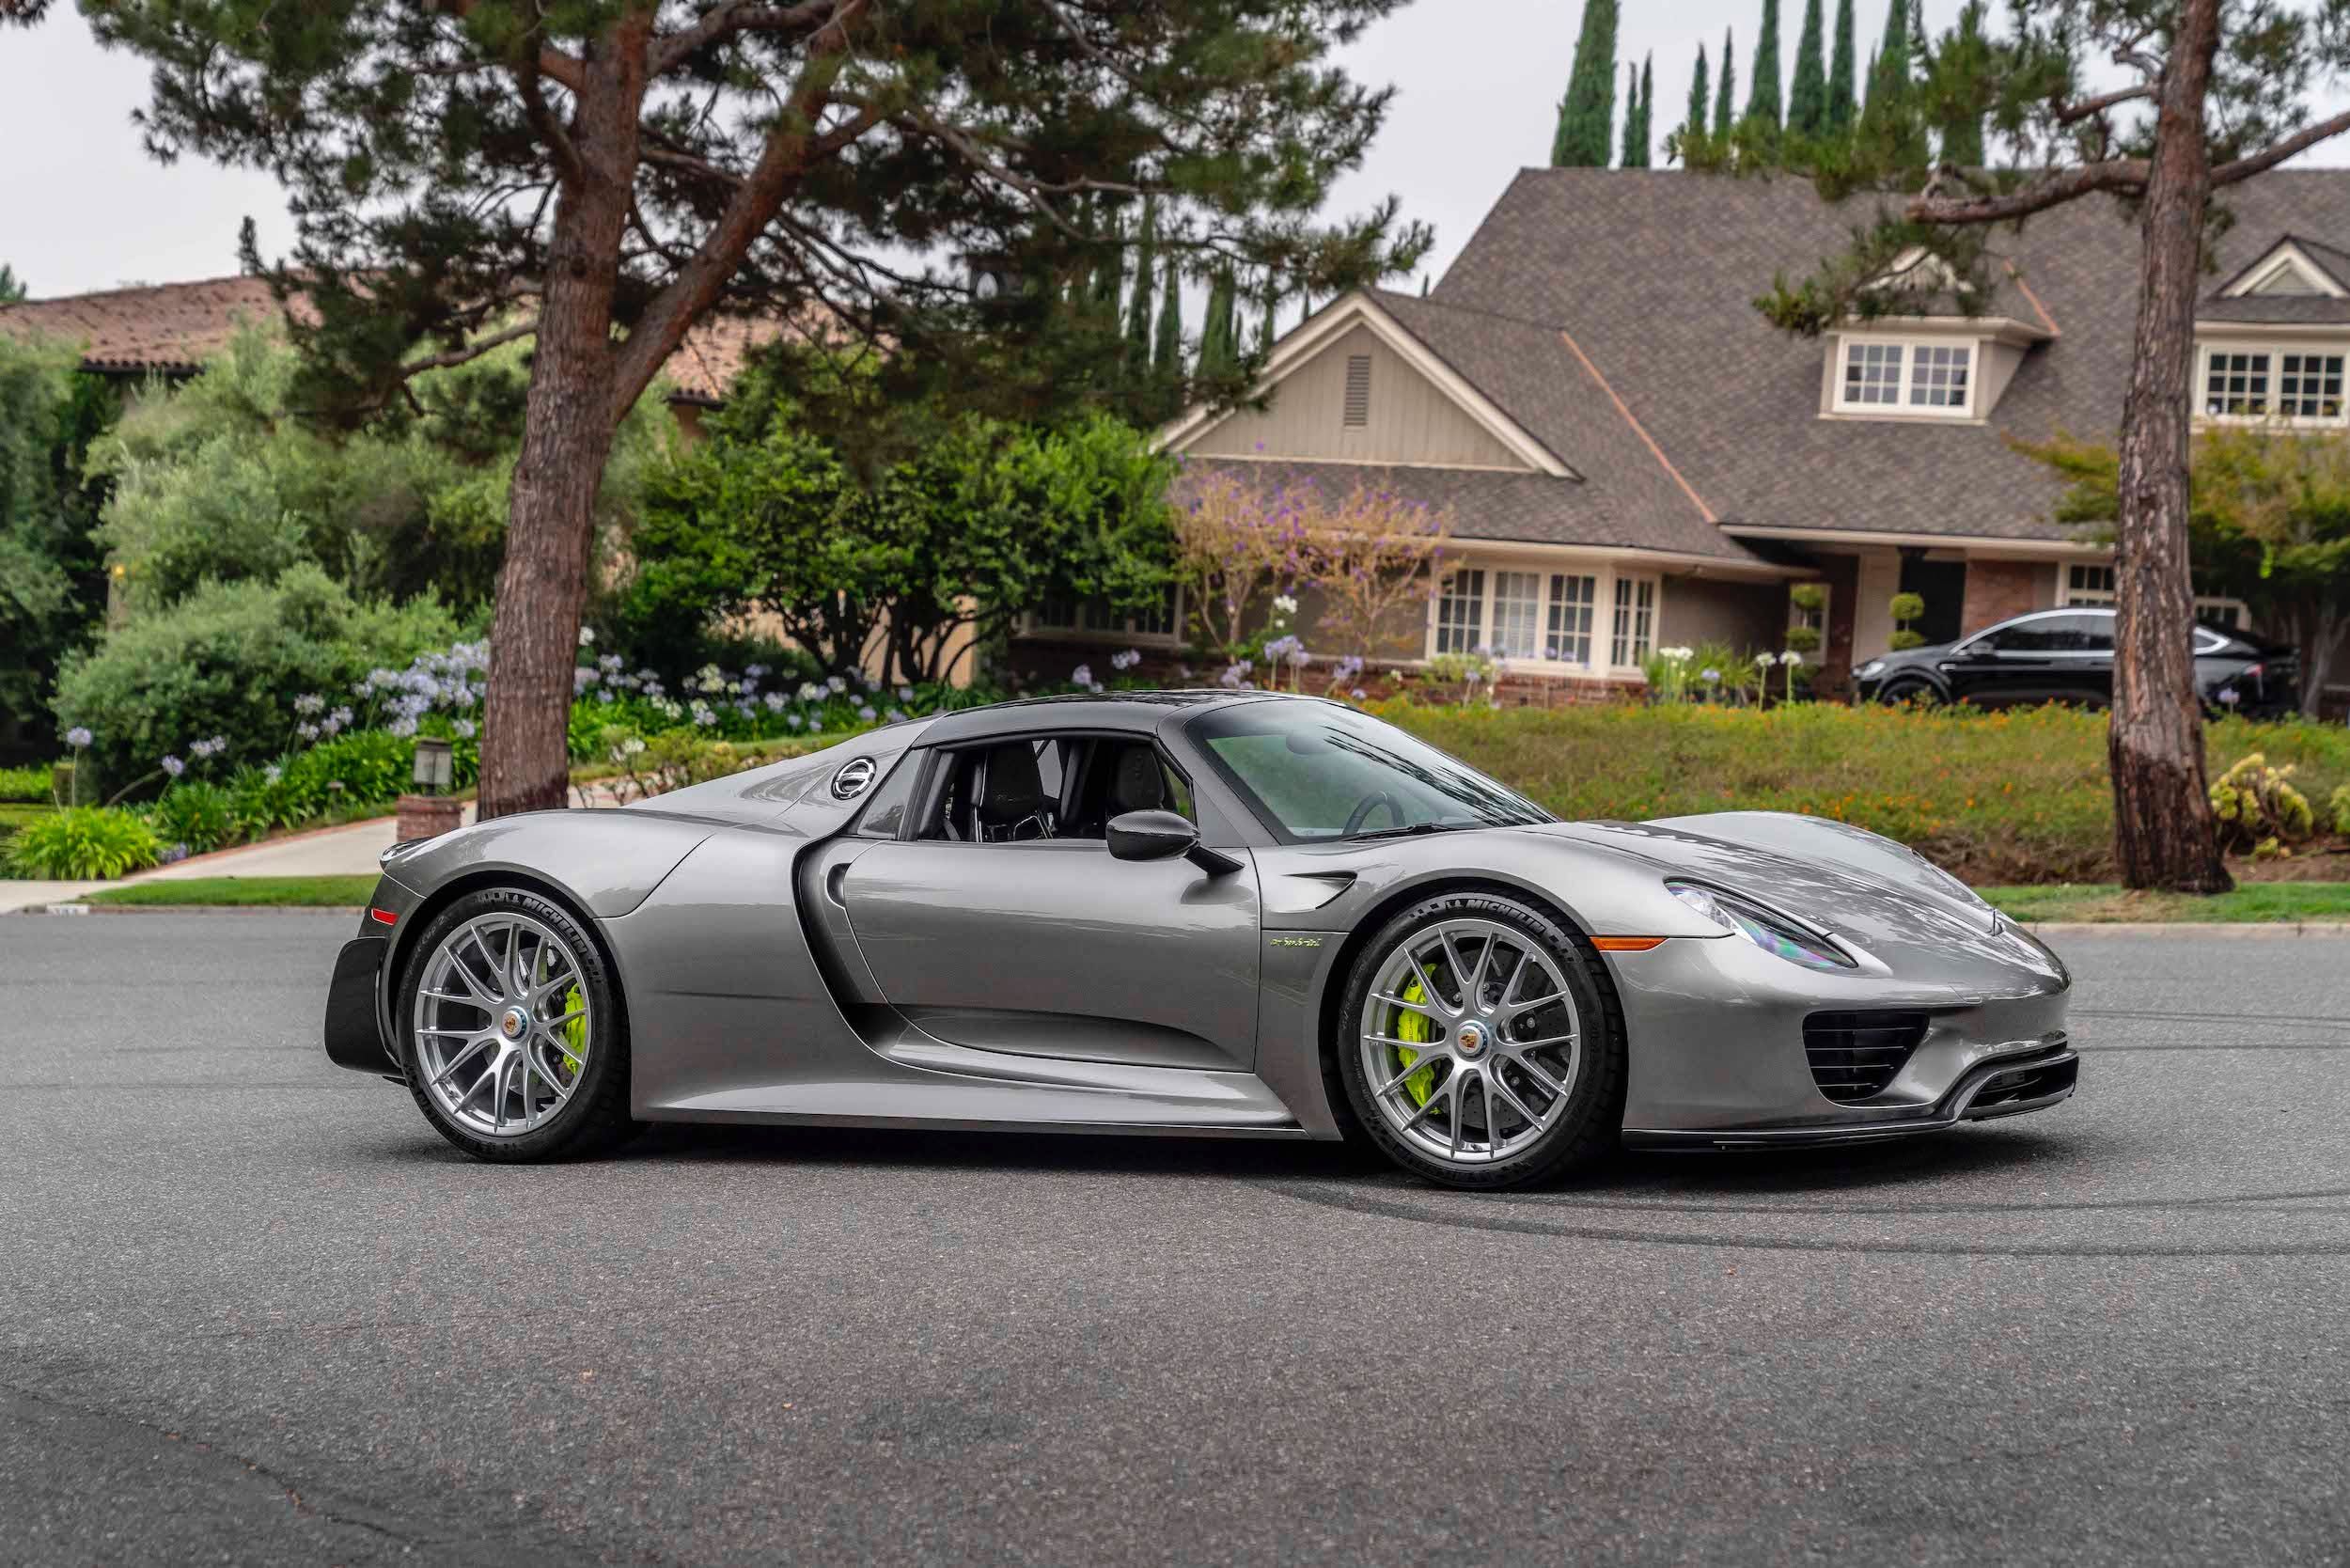 Take Home This 45-Mile Porsche 918 Weissach For A Cool $2.2 Million